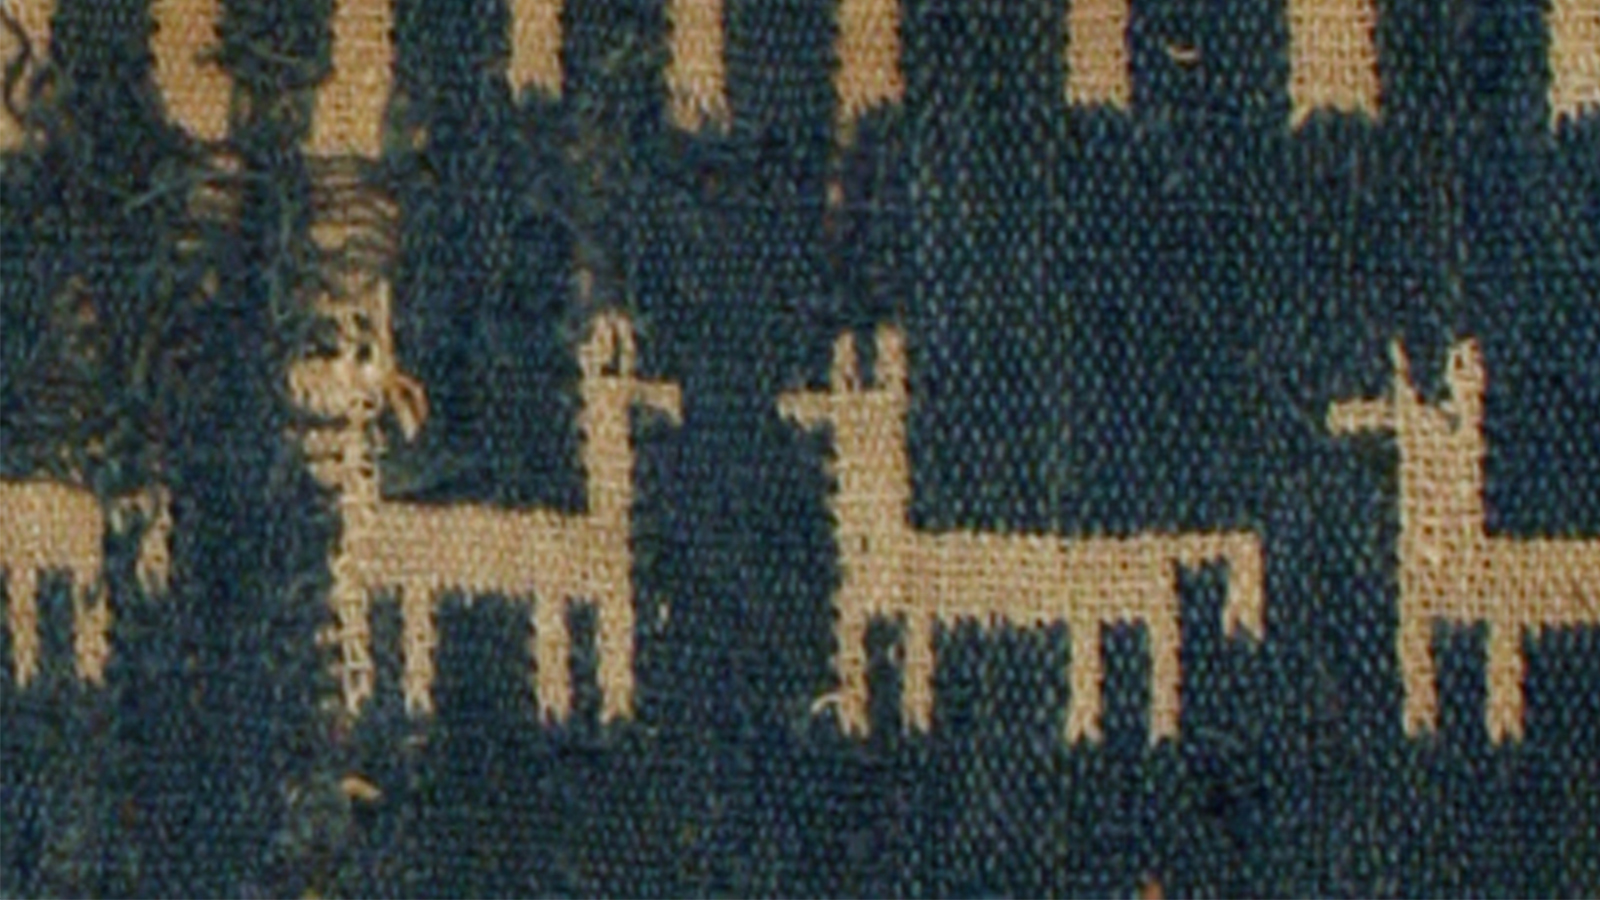 Fragment of fabric with llamas on it